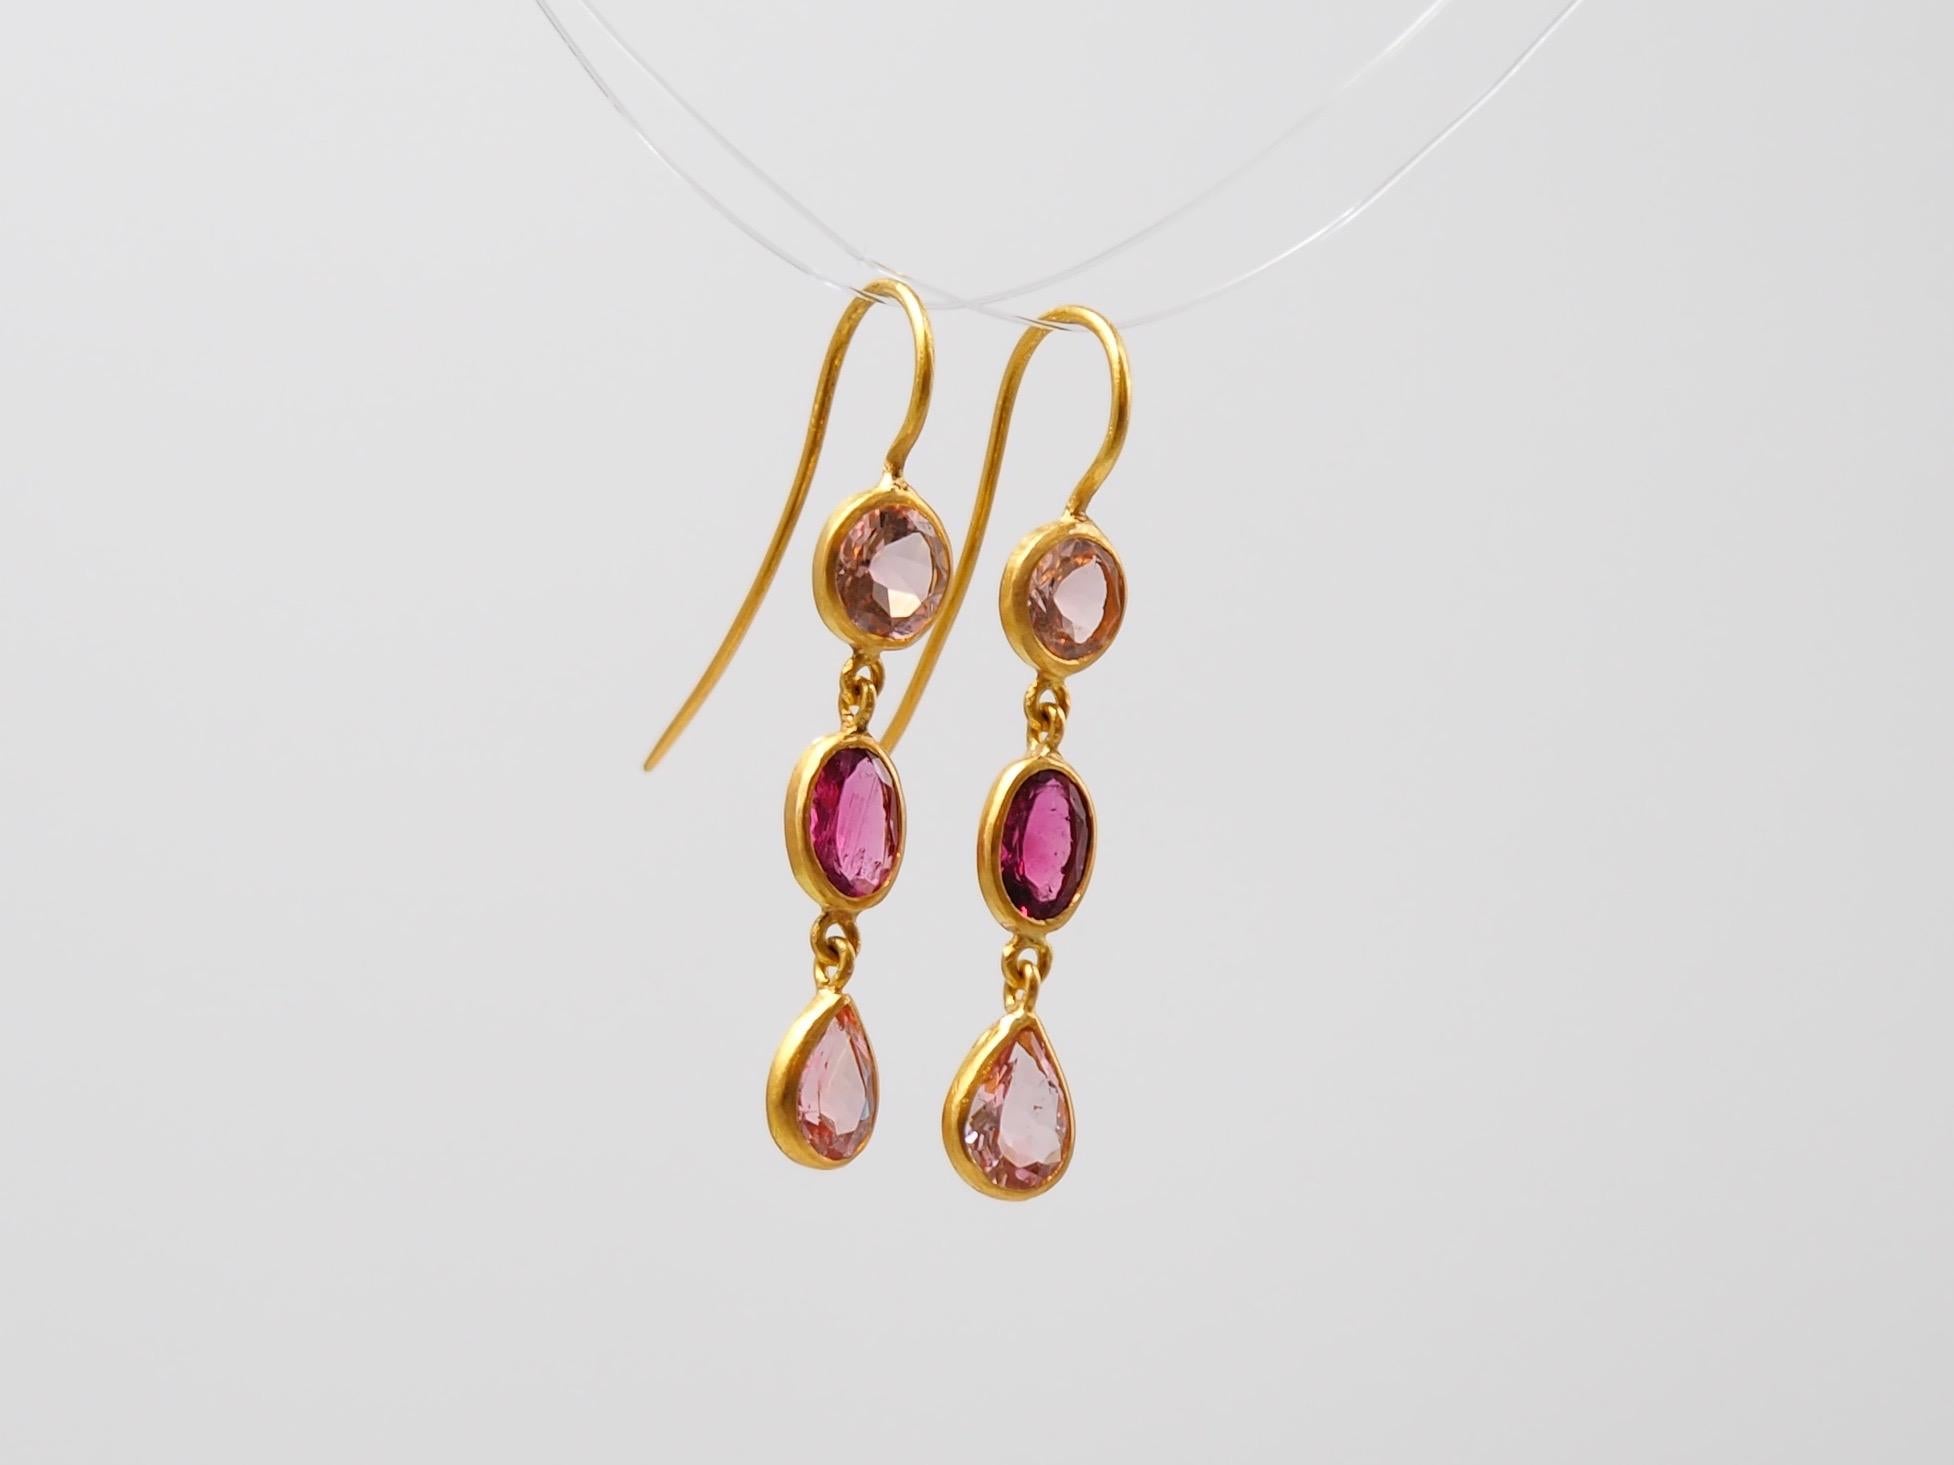 These colourful earrings by Scrives are composed of 6 Tourmalines, 2 rounds light pink - 2 ovals purple pink - 2 drops light pink,
for a total weight of 4.1 cts. 
The stones can exhibit natural and typical inclusions. 

This one-of-a-kind pair of